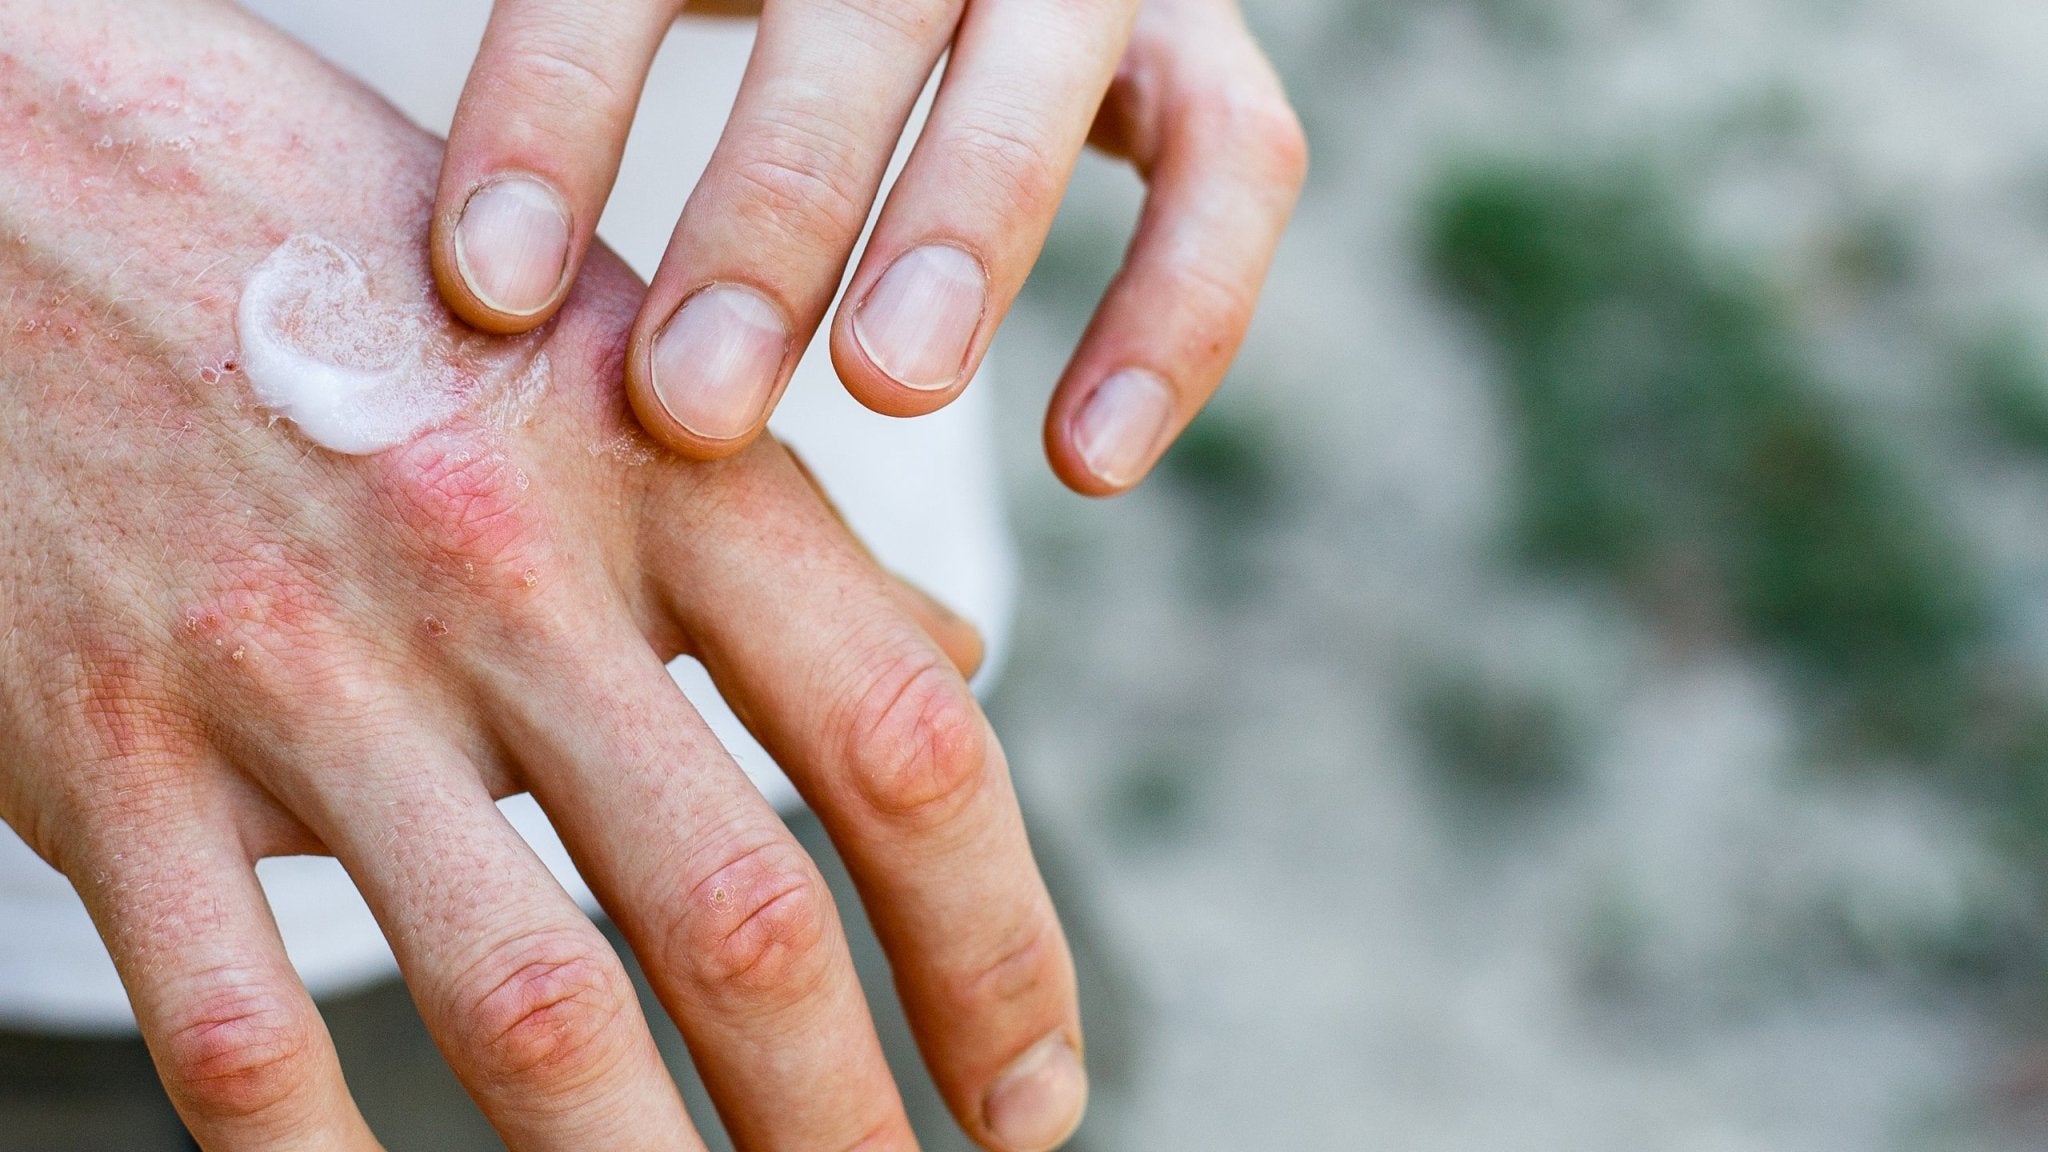 Dealing With Dry Hands in Winter? Here’s What to Do - Gladskin